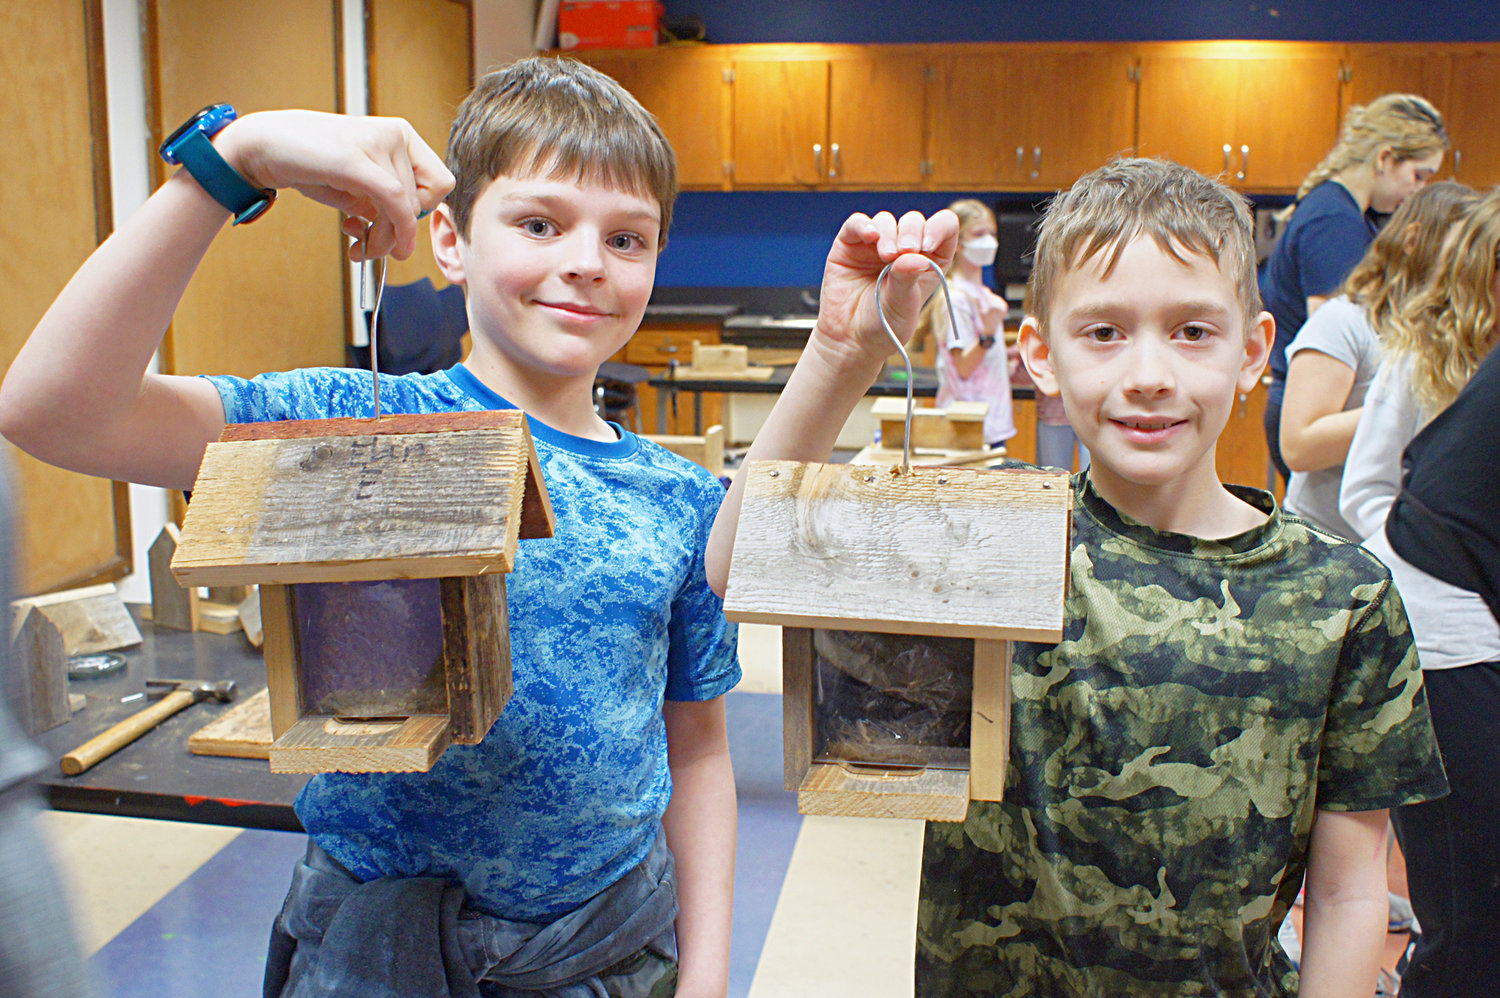 Elan Eickenlaub (left) and Ike Paar displayed their finished birdfeeders. (Photo by Terry Faust)